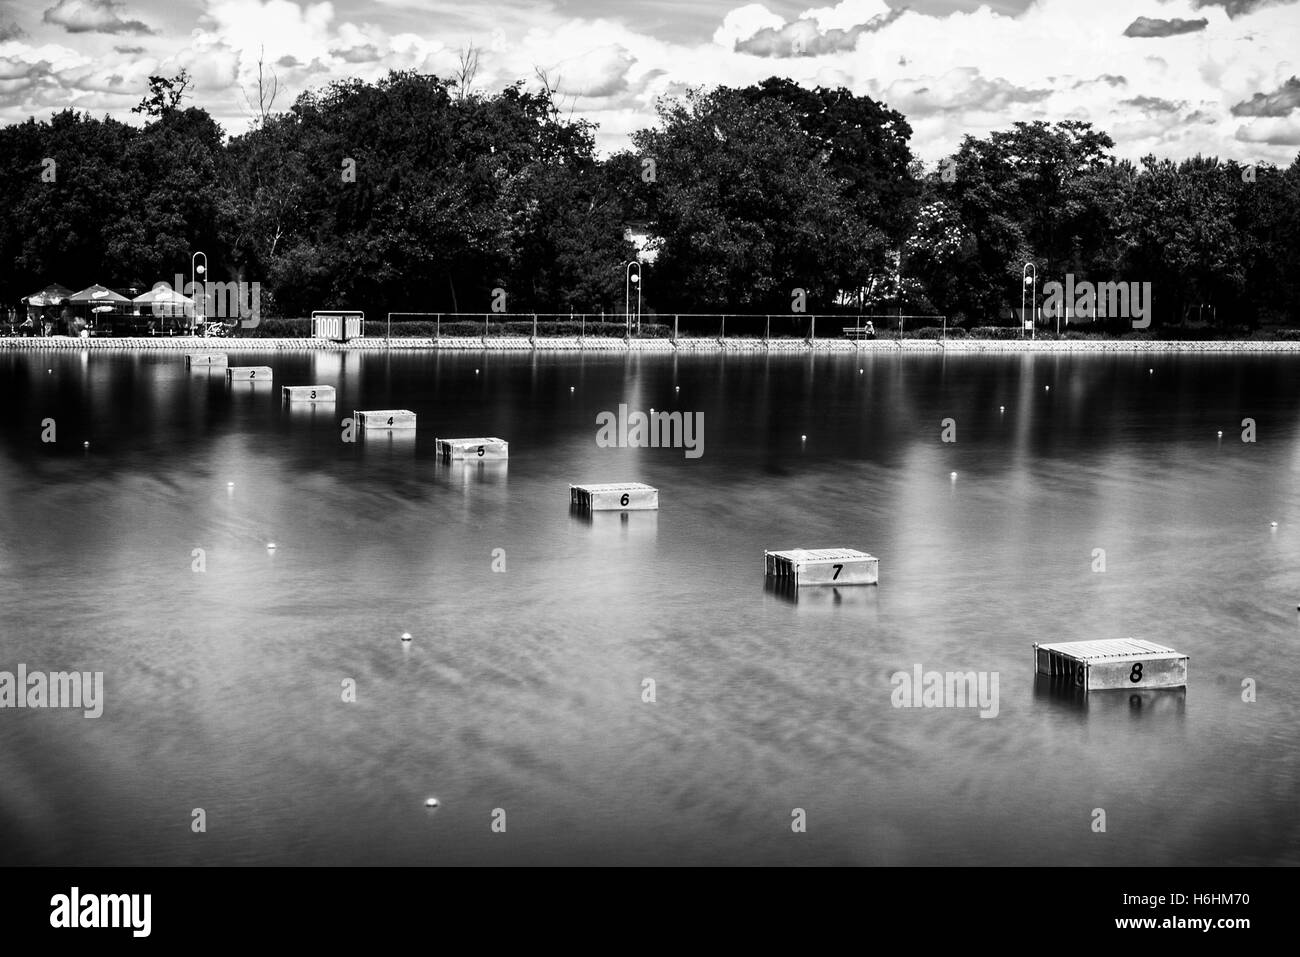 Black and white shoot of a rowing channel in Plovdiv, Bulgaria. Stock Photo